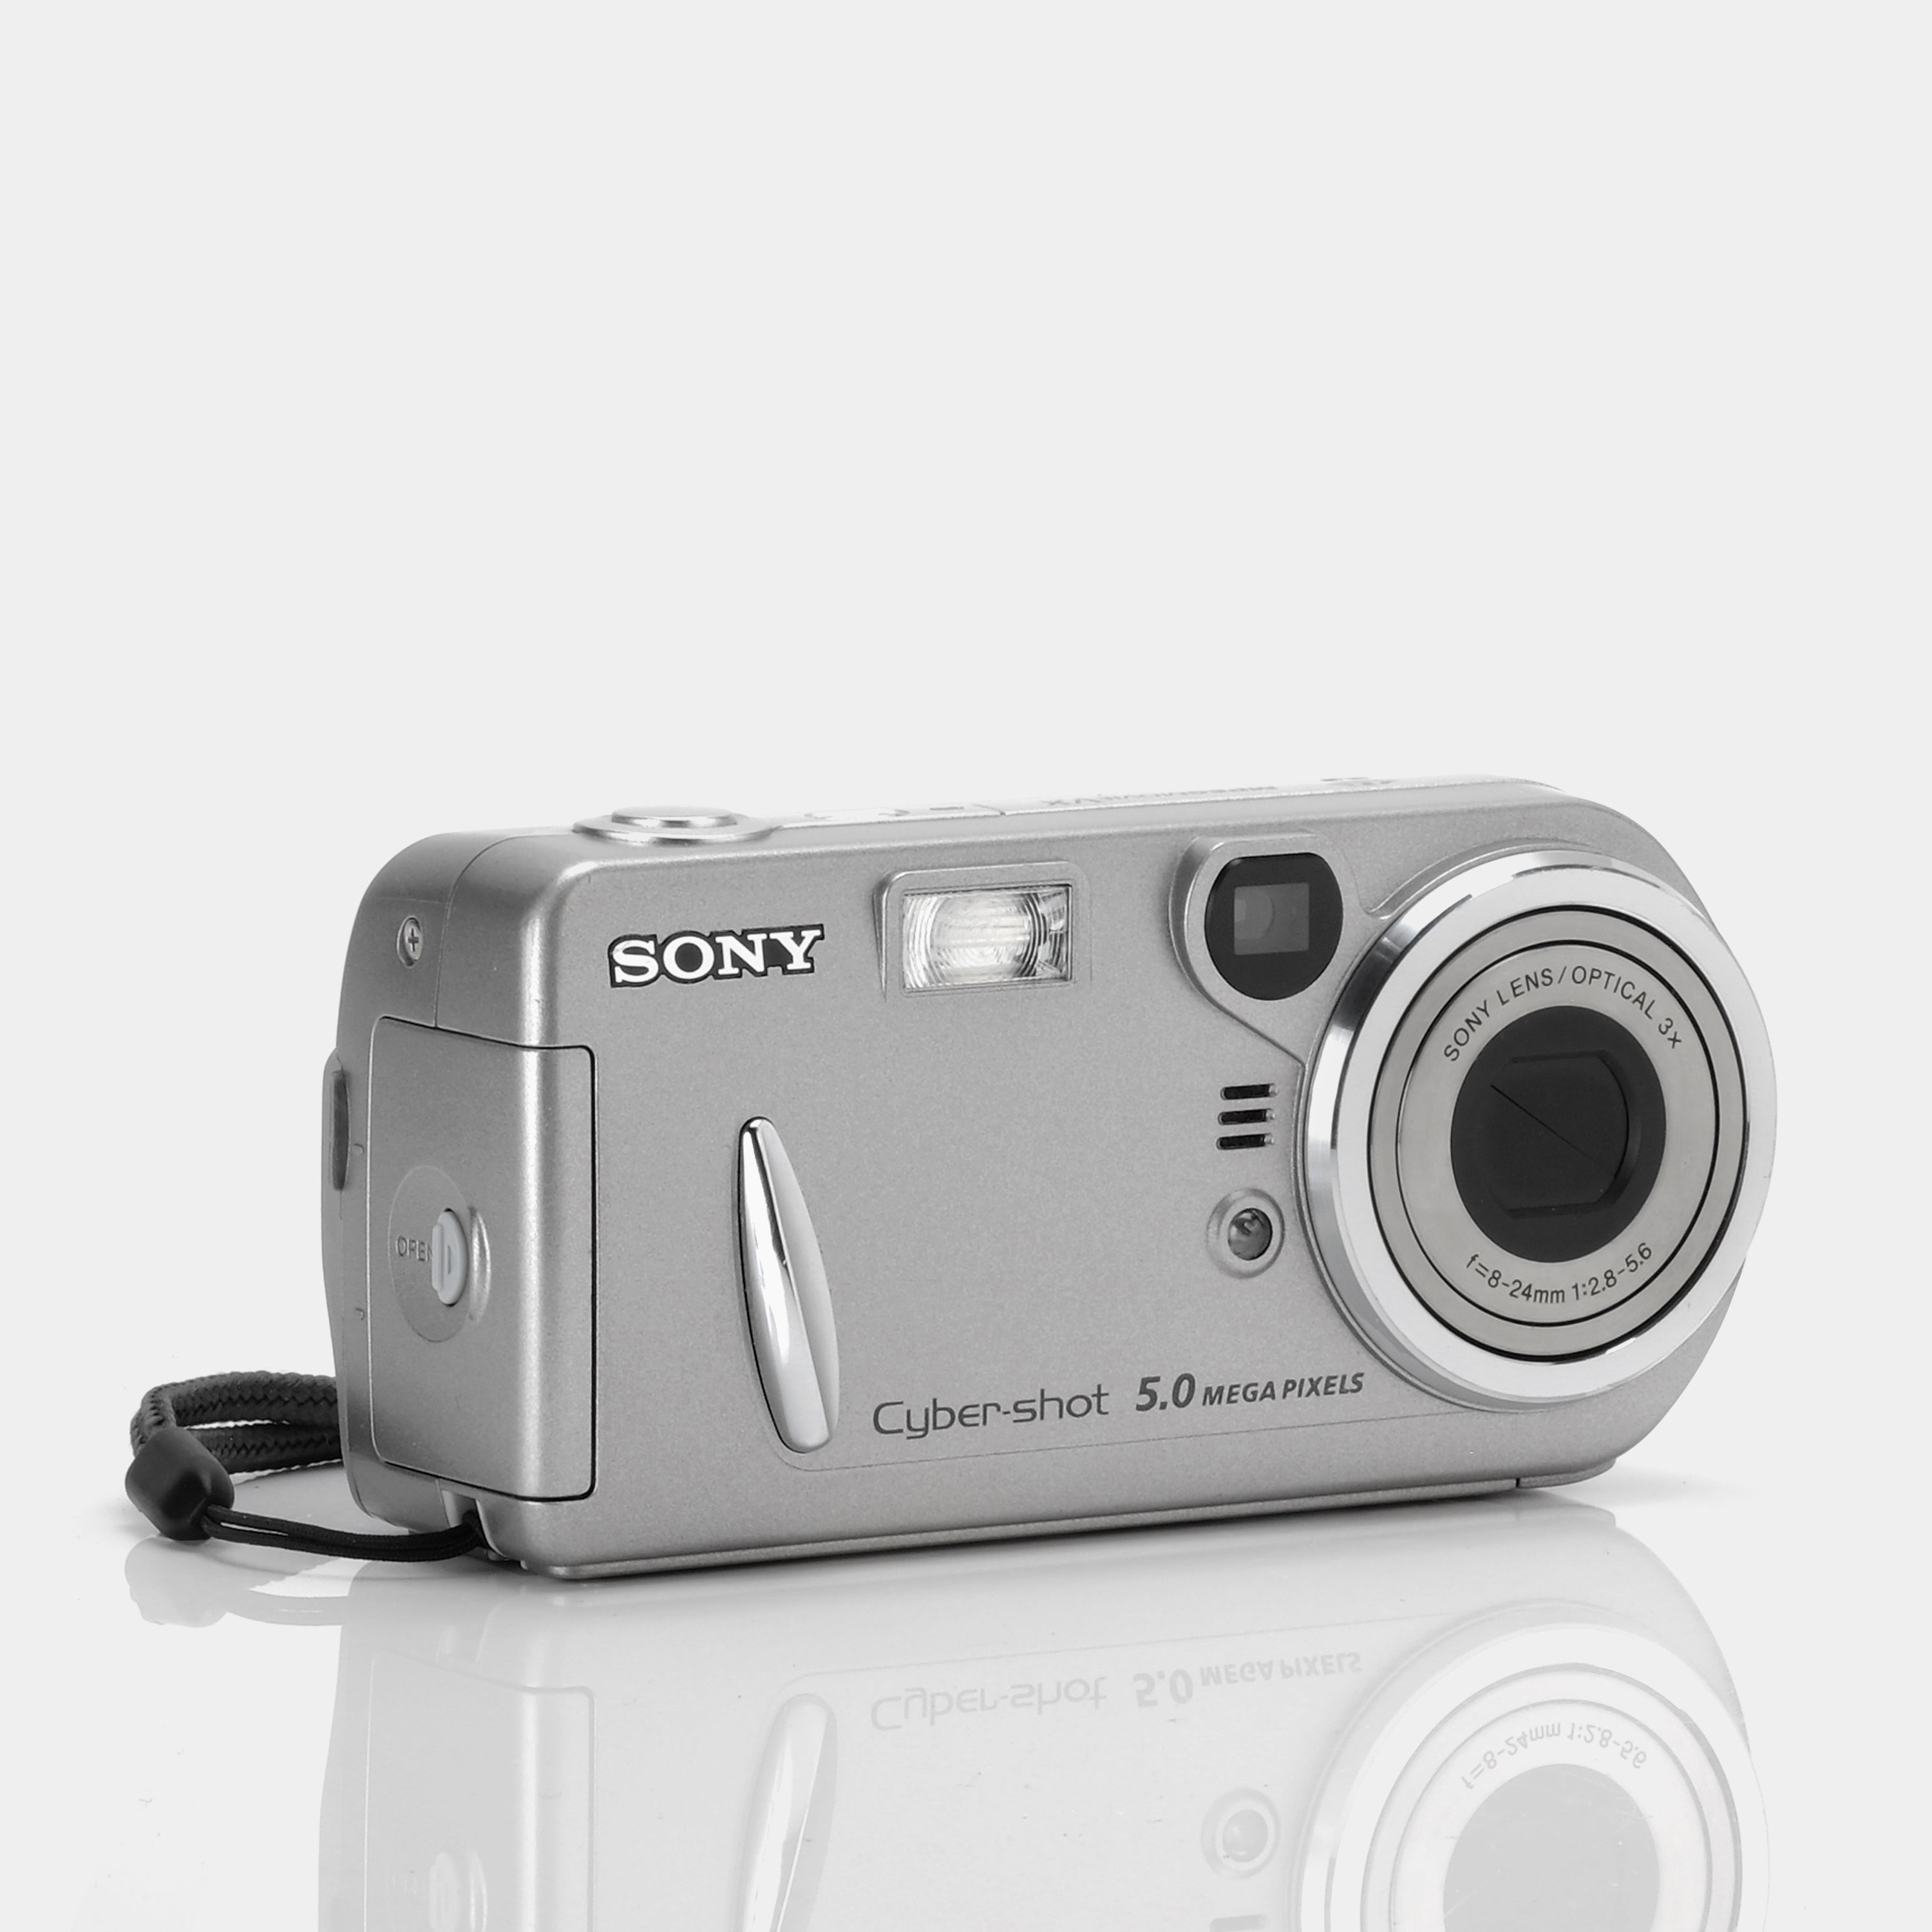 Sony Cyber-Shot Smart Zoom DSC-P92 Point and Shoot Digital Camera